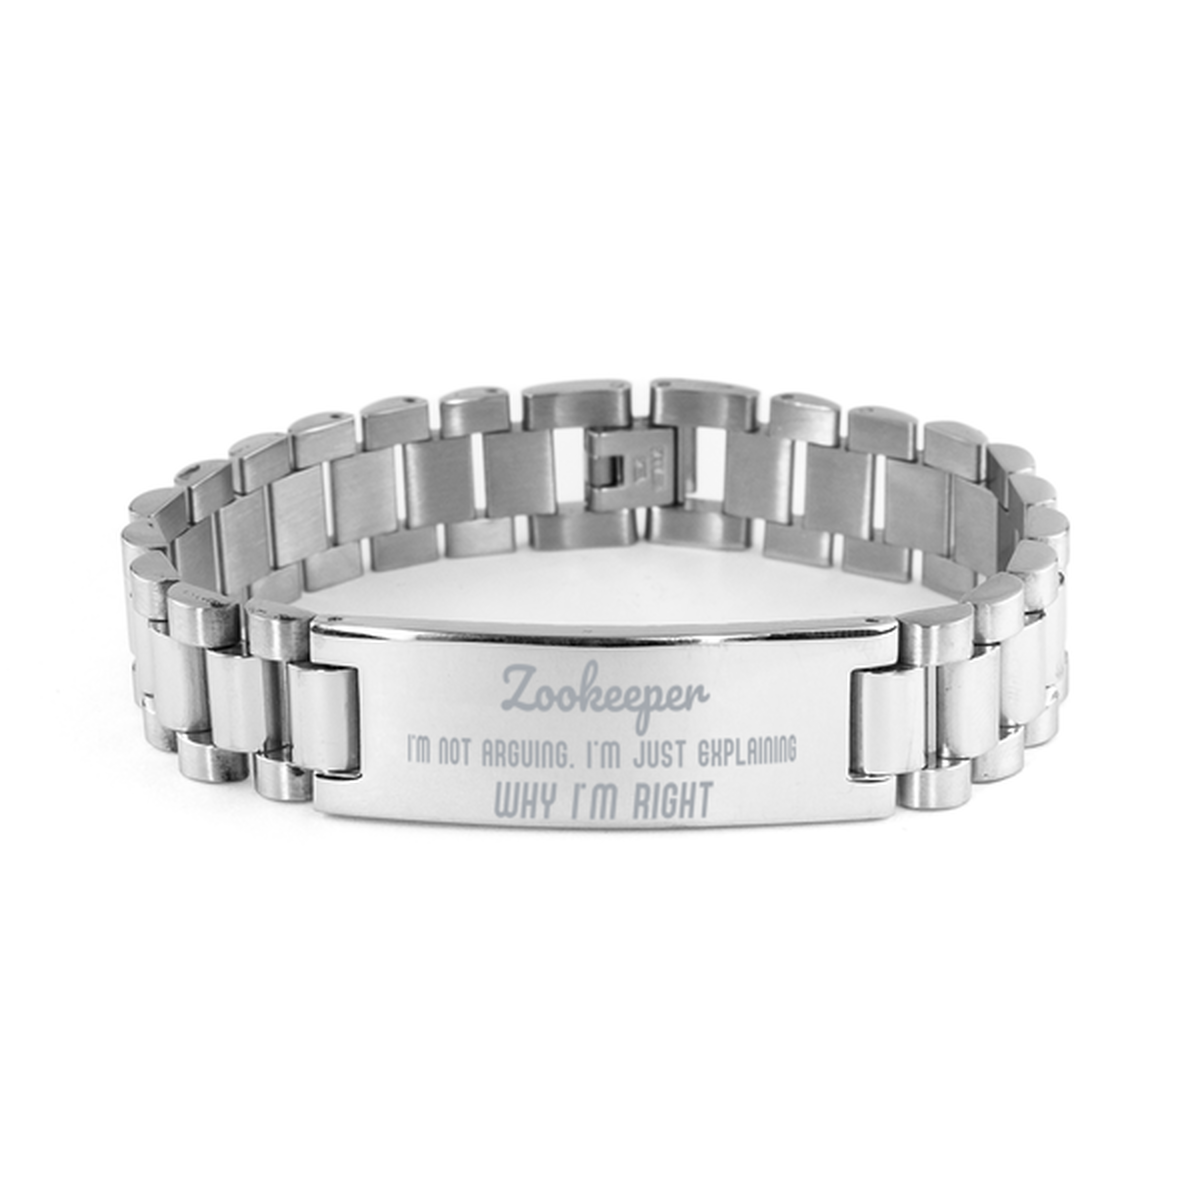 Zookeeper I'm not Arguing. I'm Just Explaining Why I'm RIGHT Ladder Stainless Steel Bracelet, Graduation Birthday Christmas Zookeeper Gifts For Zookeeper Funny Saying Quote Present for Men Women Coworker